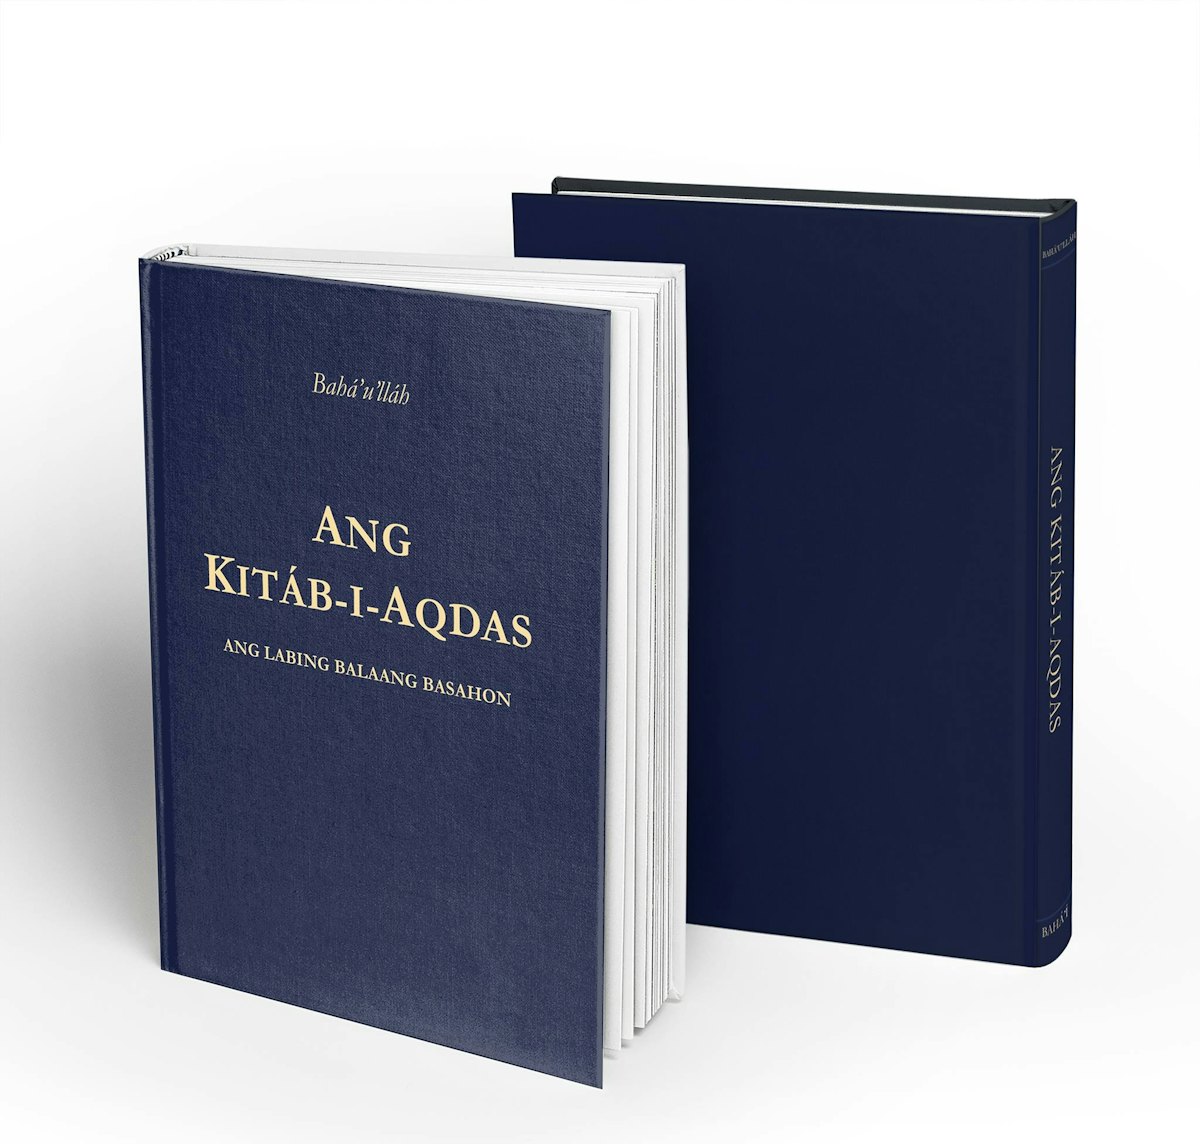 The Kitab-i-Aqdas, the Most Holy Book of the Baha’i Faith, was translated into Cebuano, spoken by about 20 million people in the central Philippines.